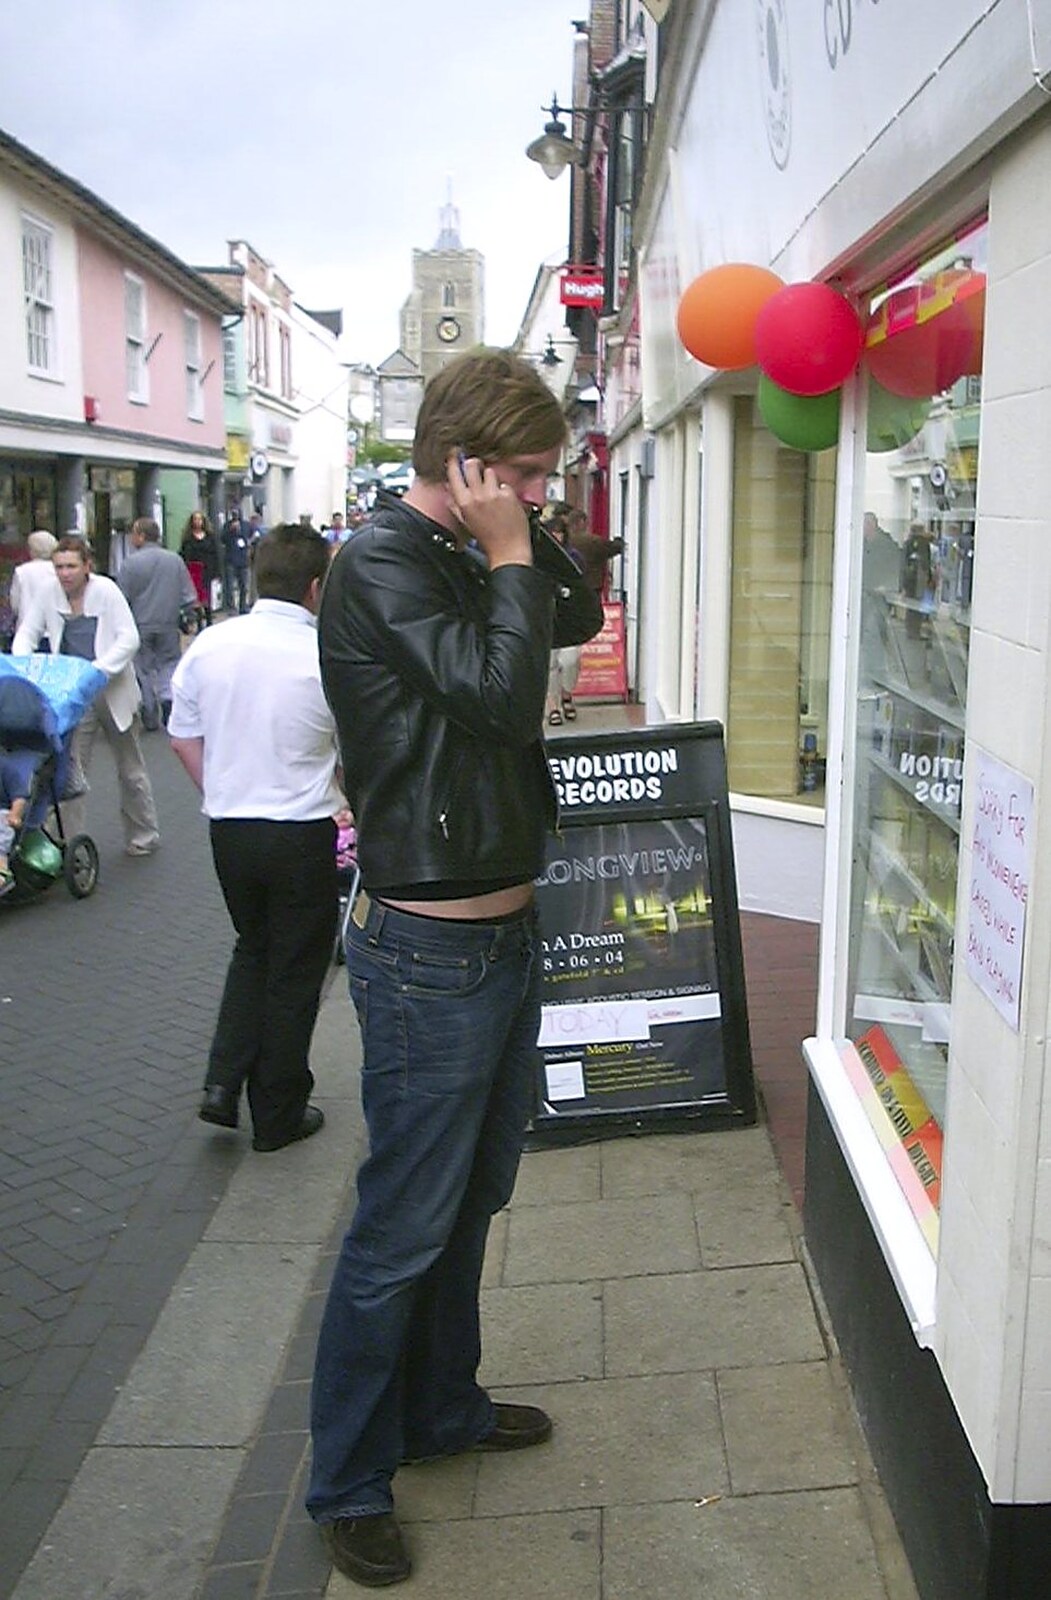 On the phone outside Revolution Records from Longview play Revolution Records, Diss, Norfolk - 2nd July 2004